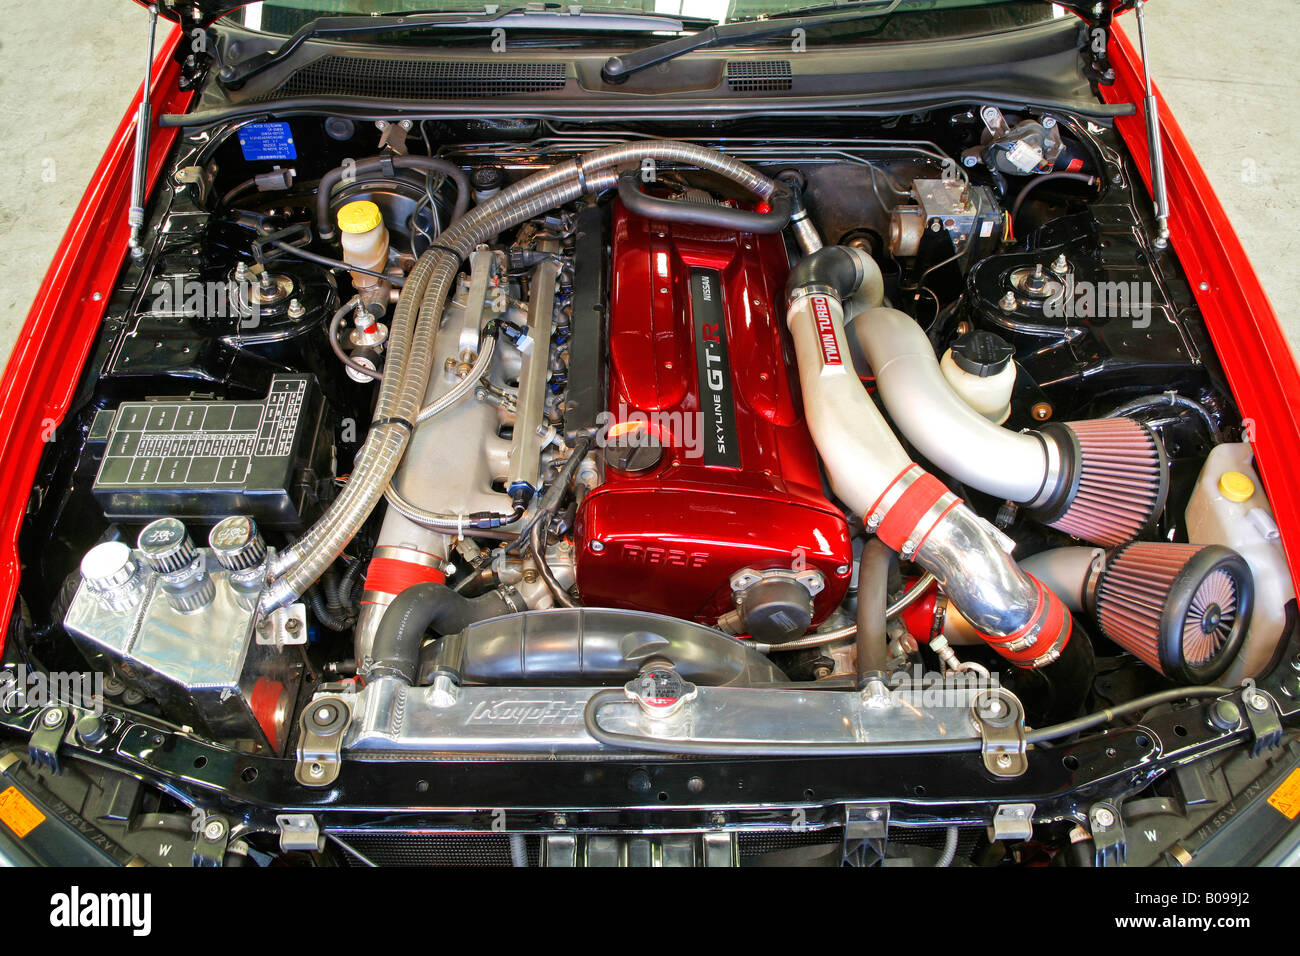 slightly modified Nissan RB26DETT engine as seen in an R34 GT-R Nissan  Skyline Stock Photo - Alamy